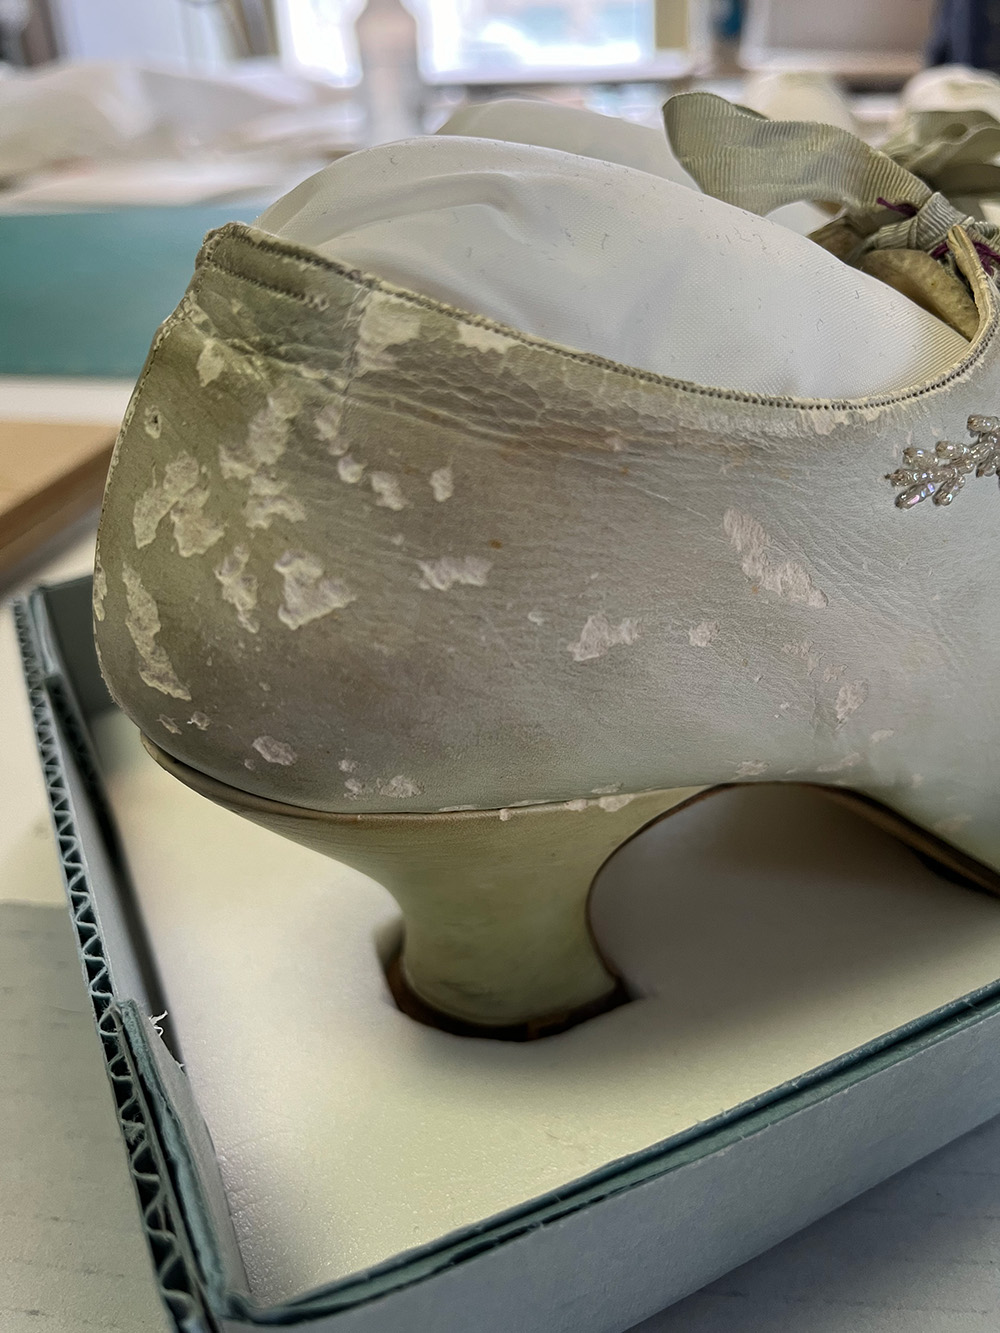 The heel of the right shoe has the worst—and most textbook—damage from silverfish grazing. You can see how the insect has sort of rasped away the surface of the leather as it wandered over the surface. 